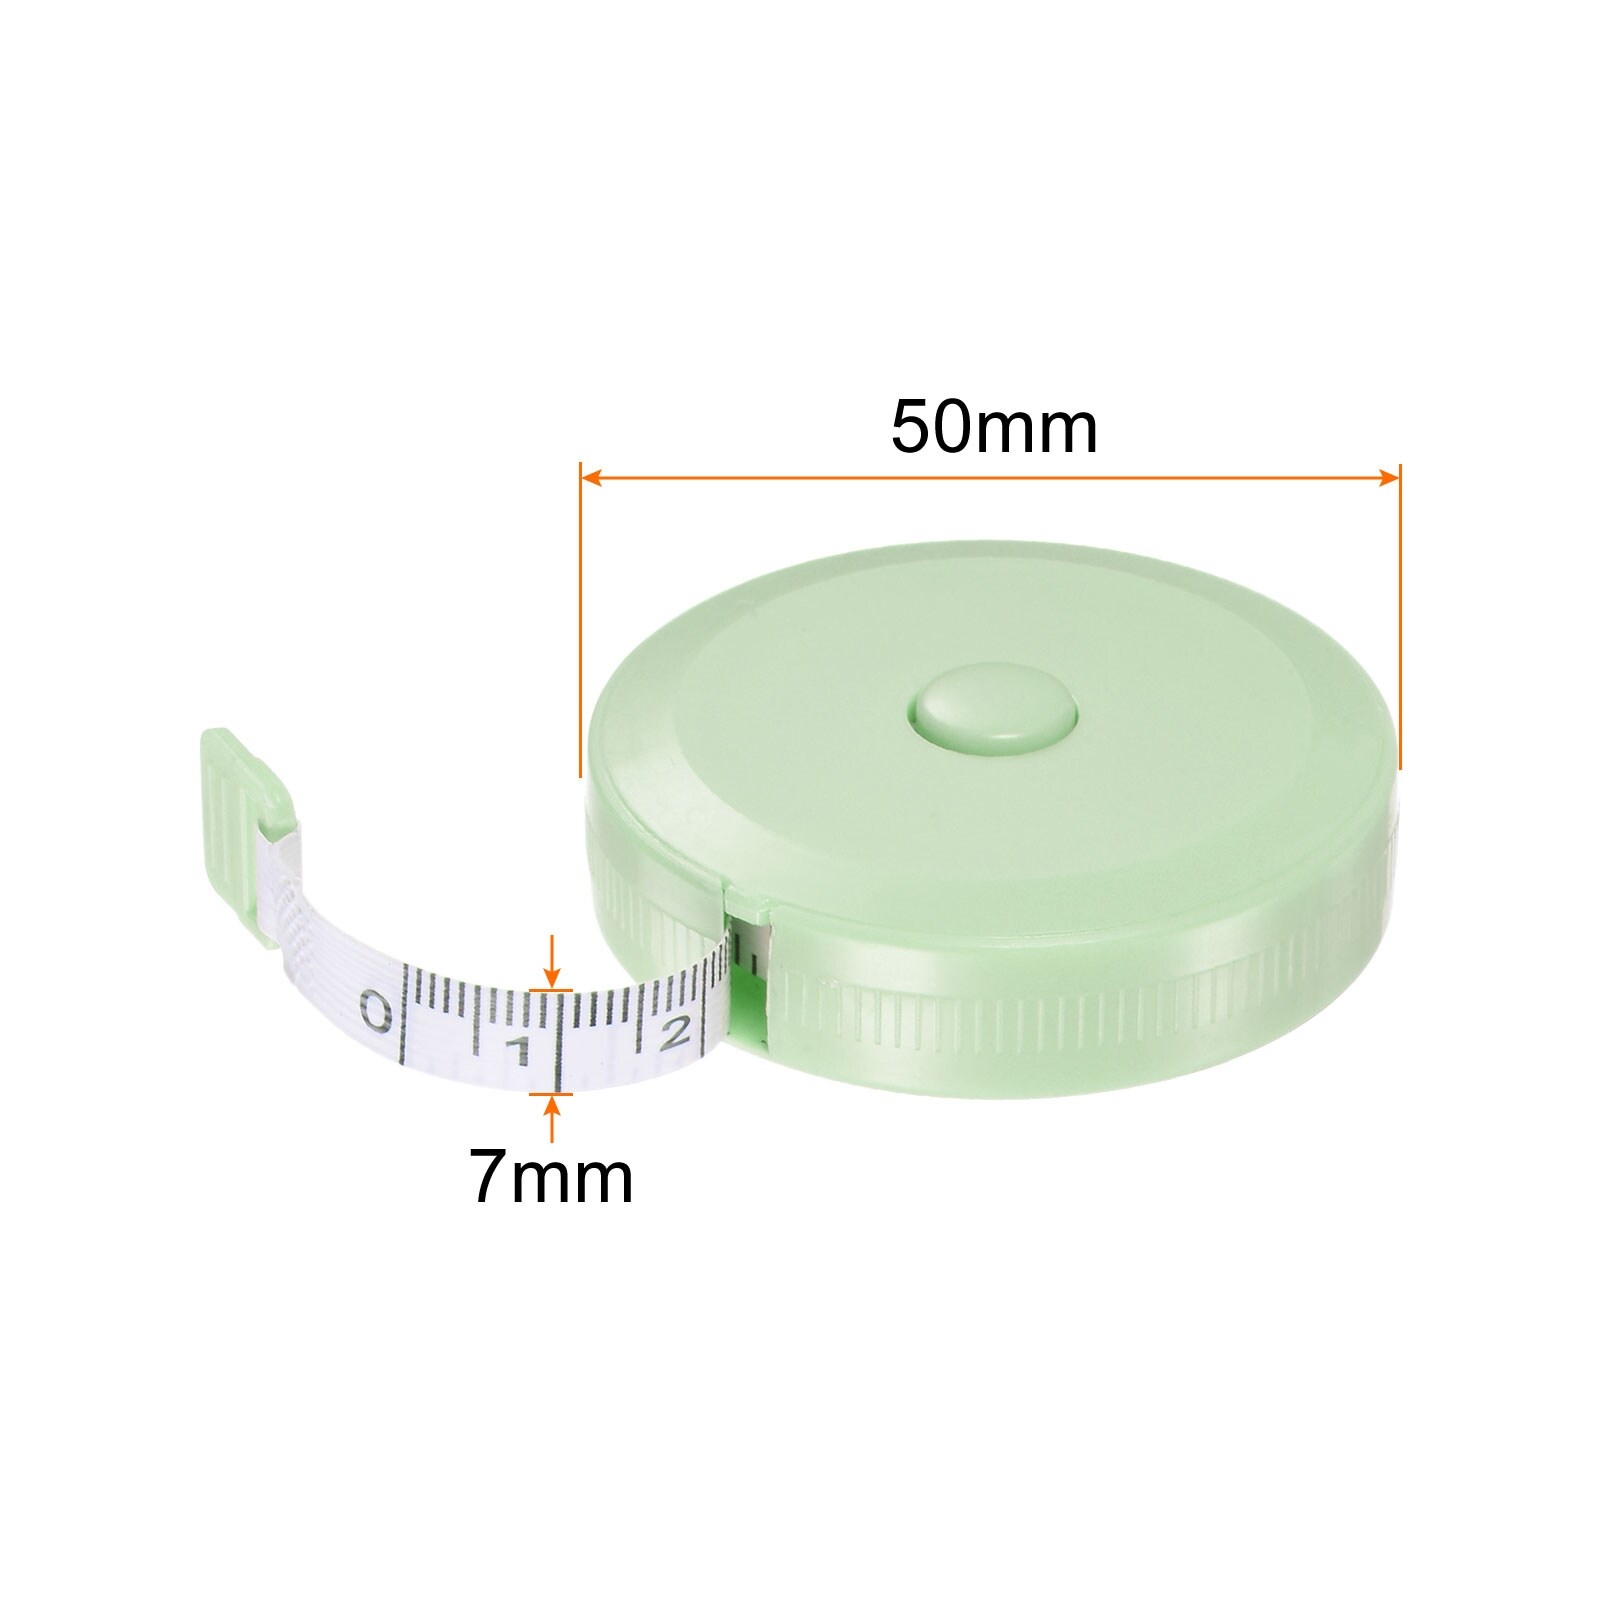 https://ak1.ostkcdn.com/images/products/is/images/direct/b9558a40f797dd66e7aebbebc8f211c7ca81a2b4/Measuring-Tape-1.5M-60-inch-Round-Retractable-Tailors-Tape-Measure%2C-Green.jpg